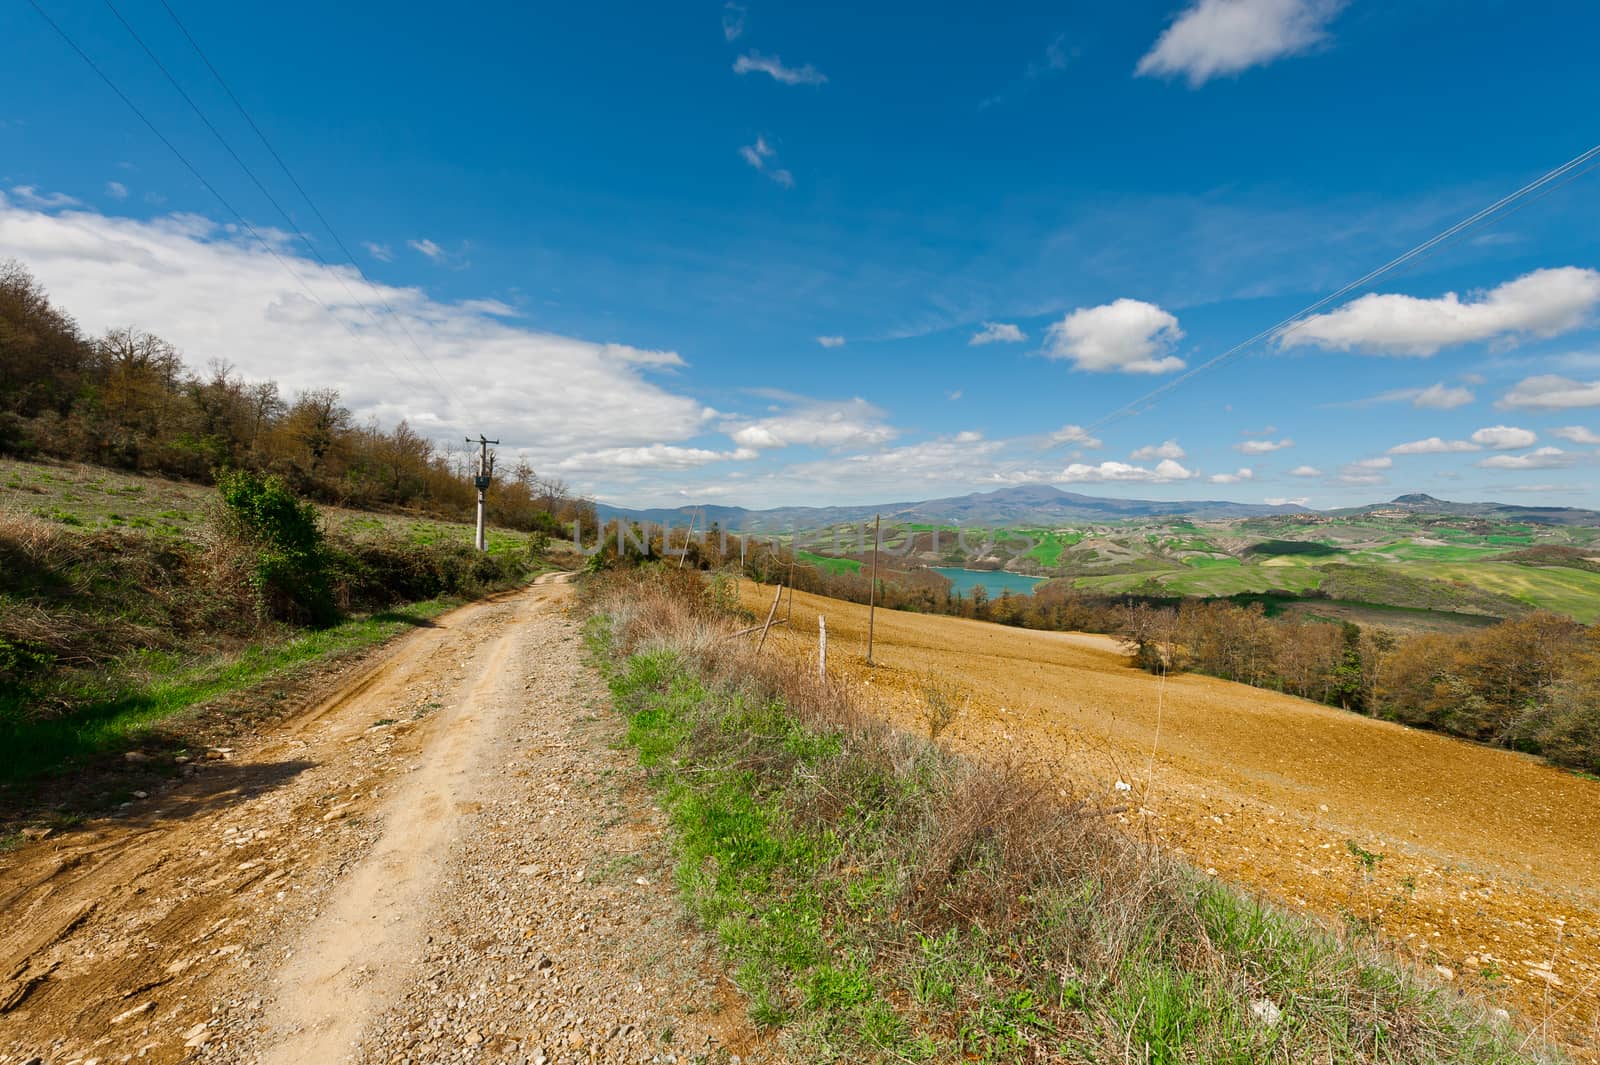 The Dirt Road Leading to the Mountain Lake Surrounded by Forests and Plowed Fields in Italy